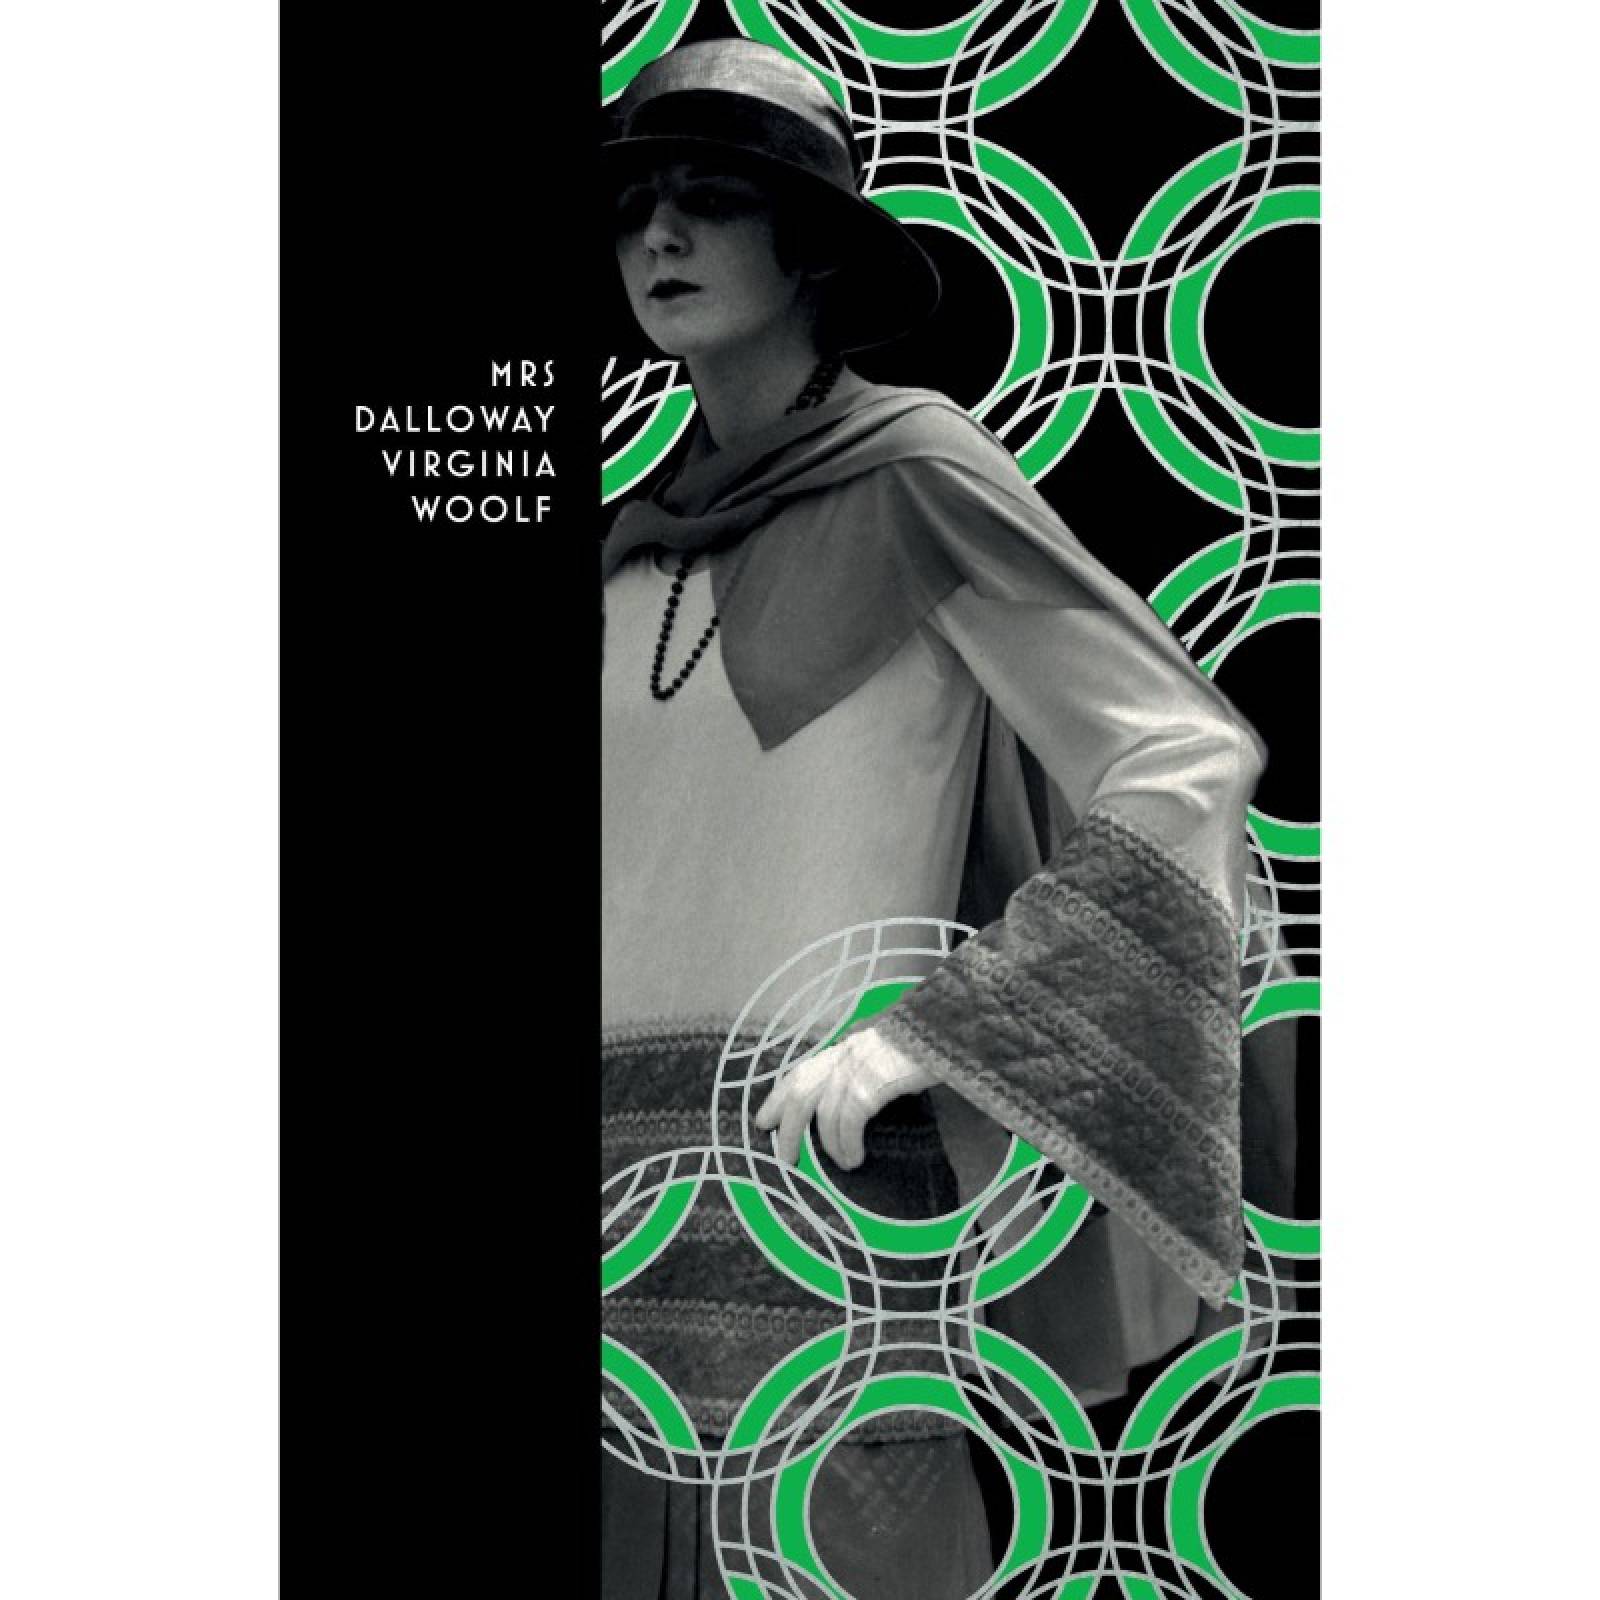 Mrs Dalloway By Virginia Woolf - Paperback Book Vintage Deco